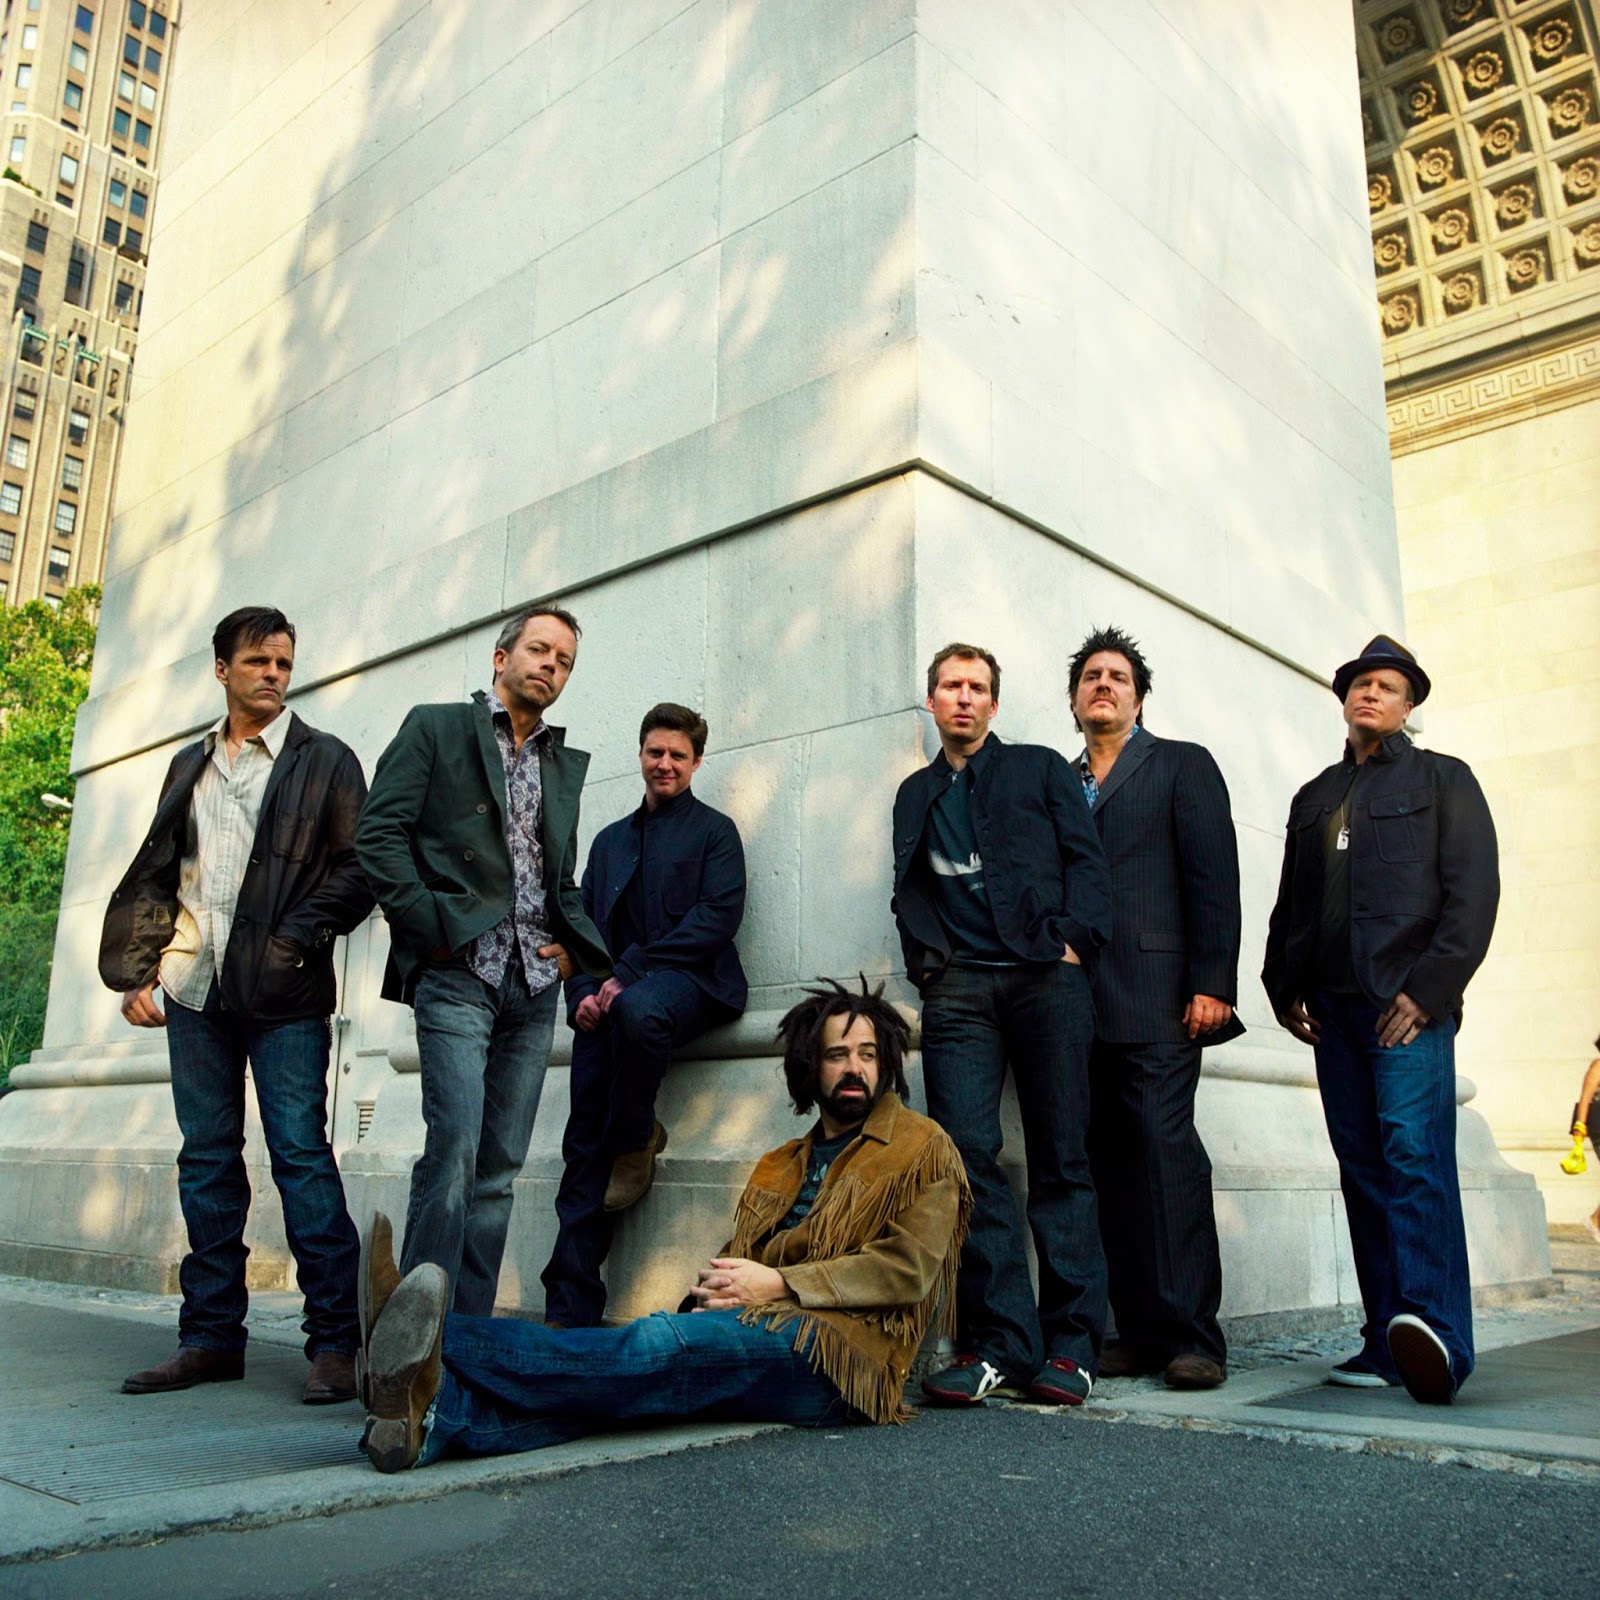 Classic Rock Radio Counting Crows New Live Album and UK Tour dates